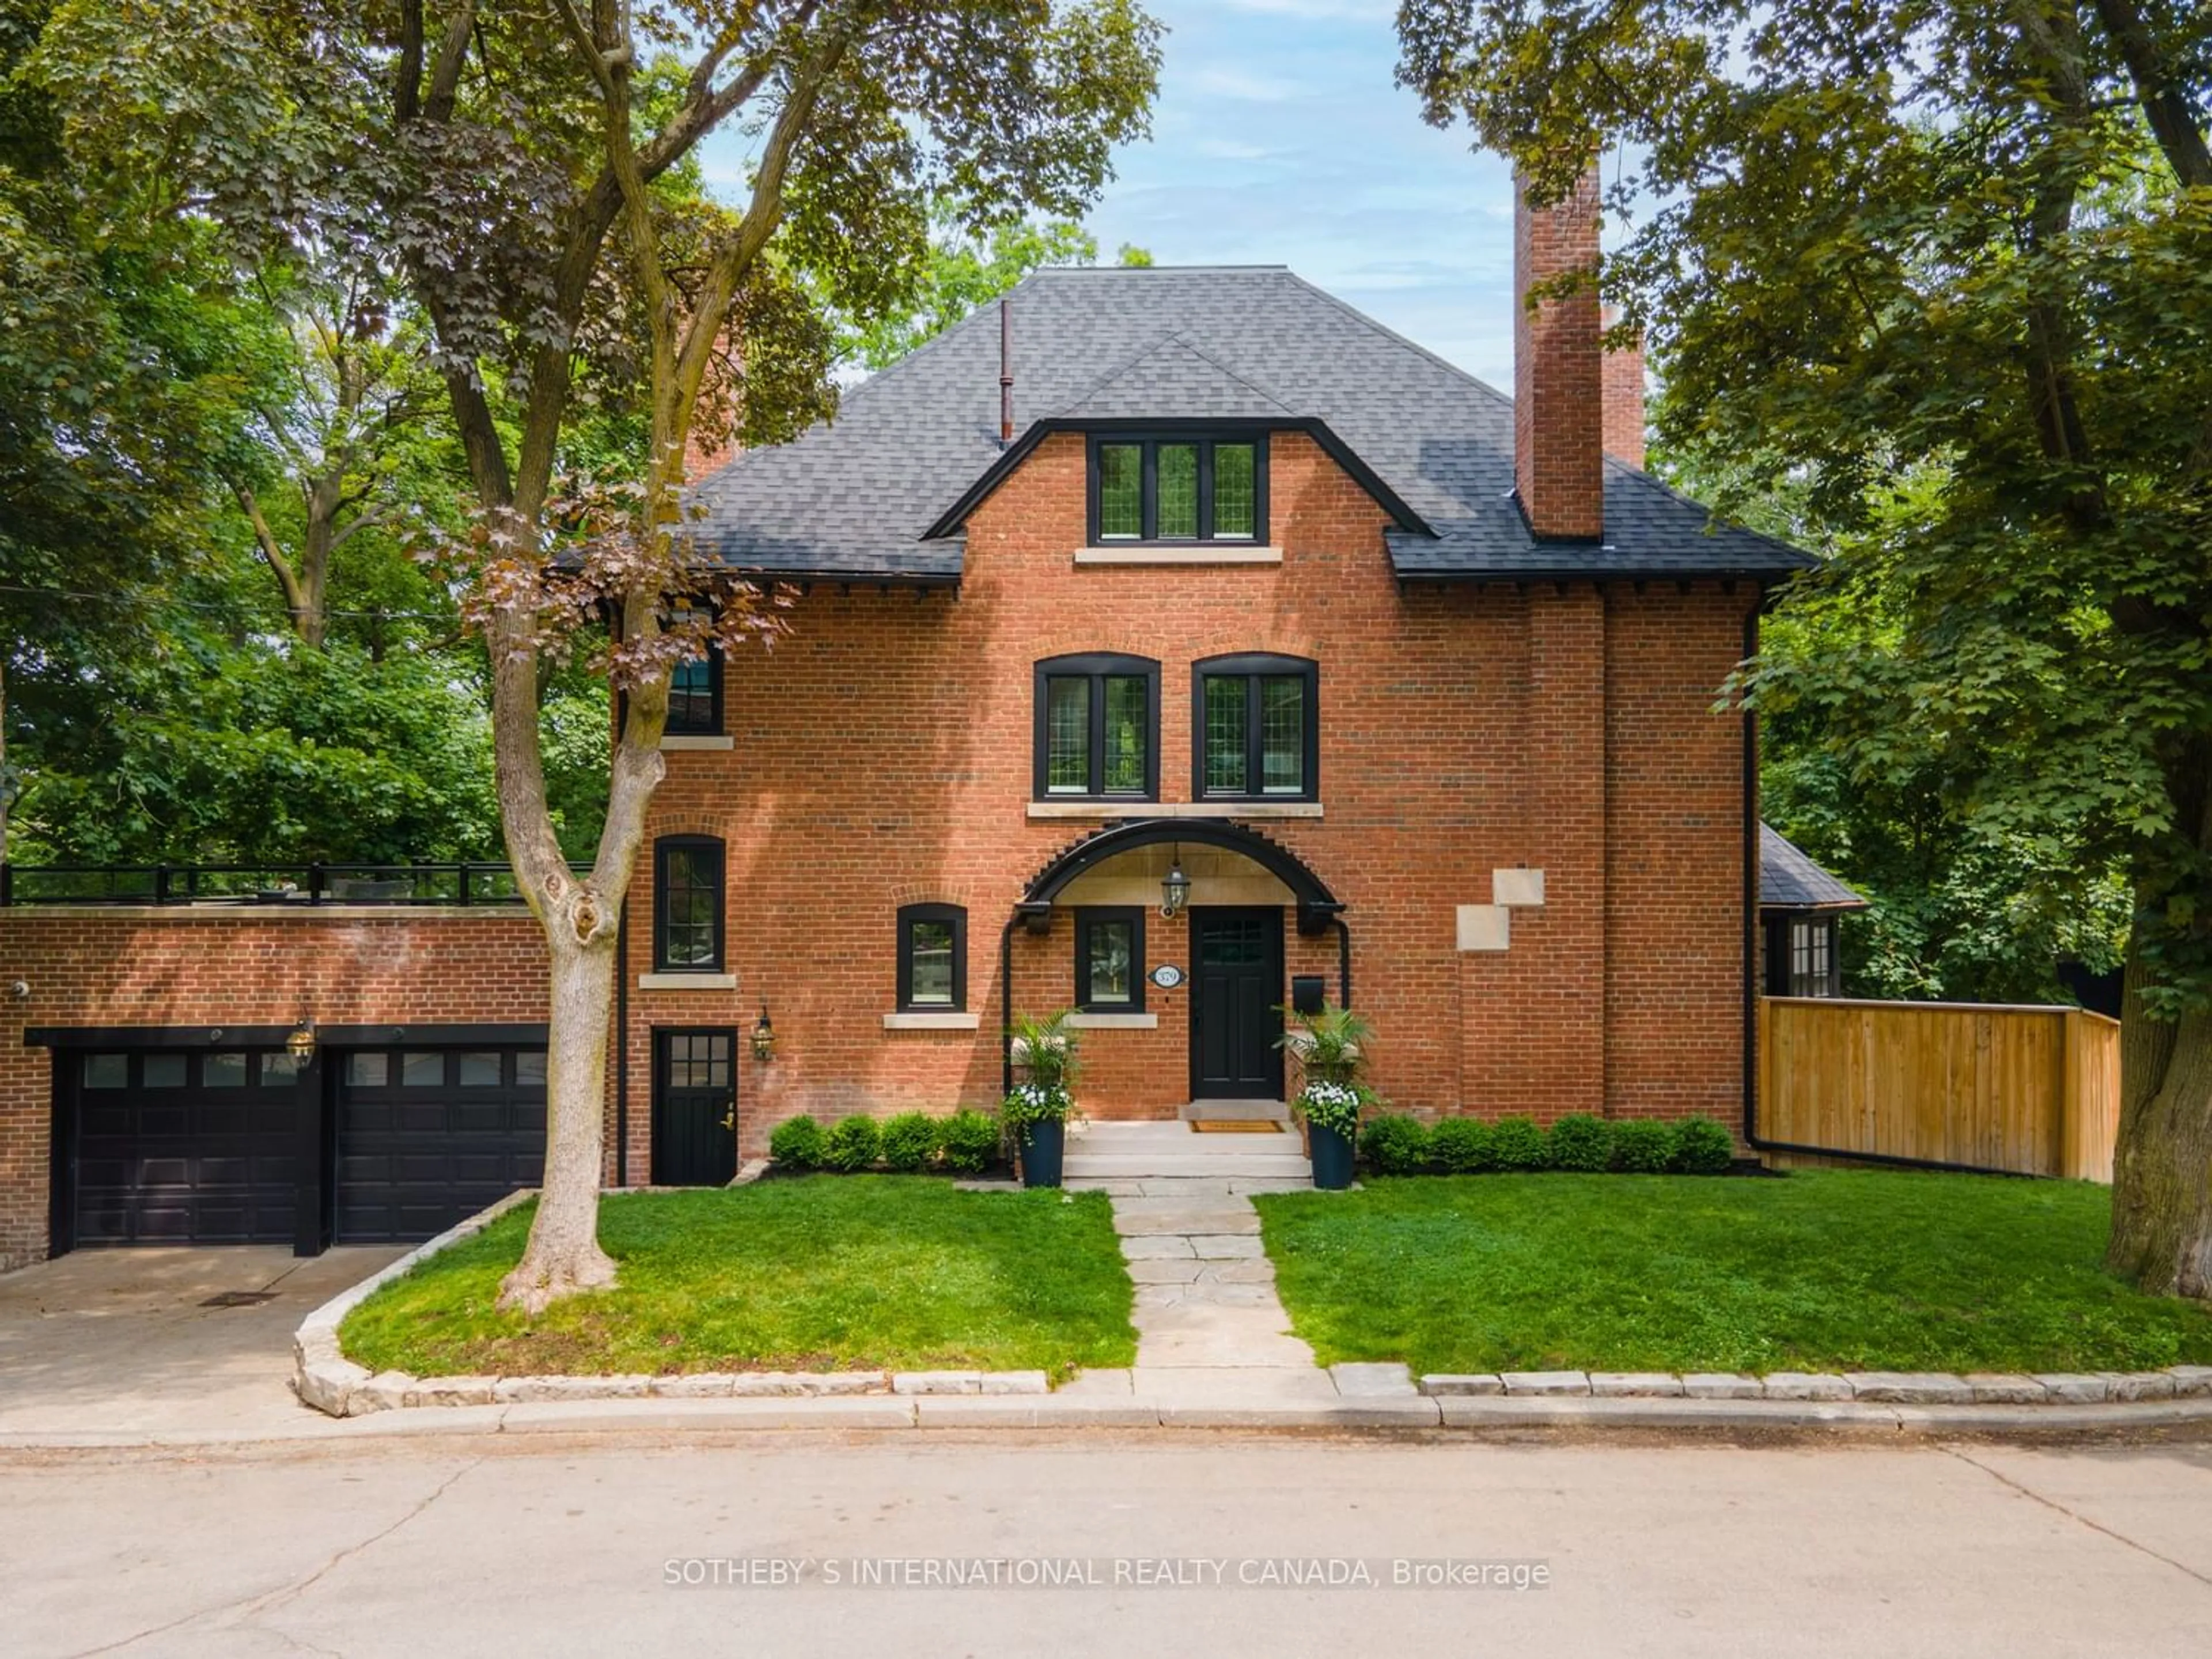 Home with brick exterior material for 379 Walmer Rd, Toronto Ontario M5R 2Y5